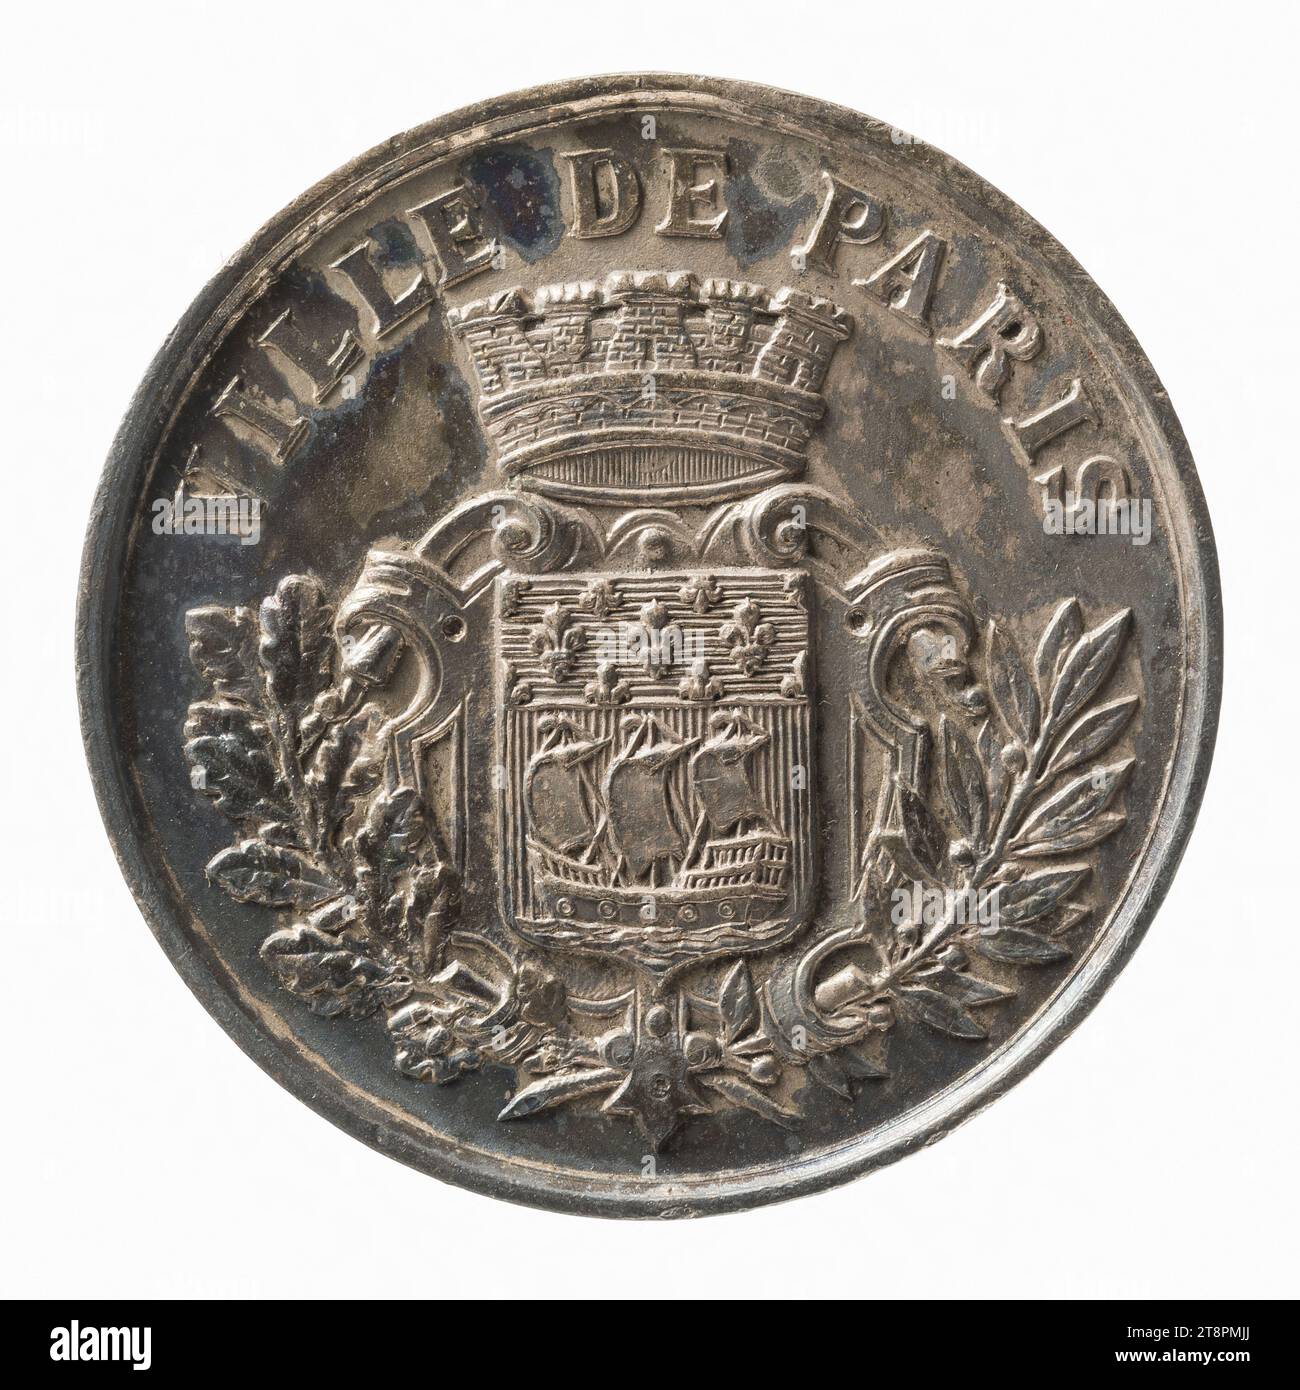 First prize of the contest of the babies of the city of Paris, 1888, In 1888, Numismatic, Token (numismatic), Silver, Engraved = incised, Dimensions - Work: Diameter: 3.6 cm, Weight (type dimension): 17.14 g Stock Photo